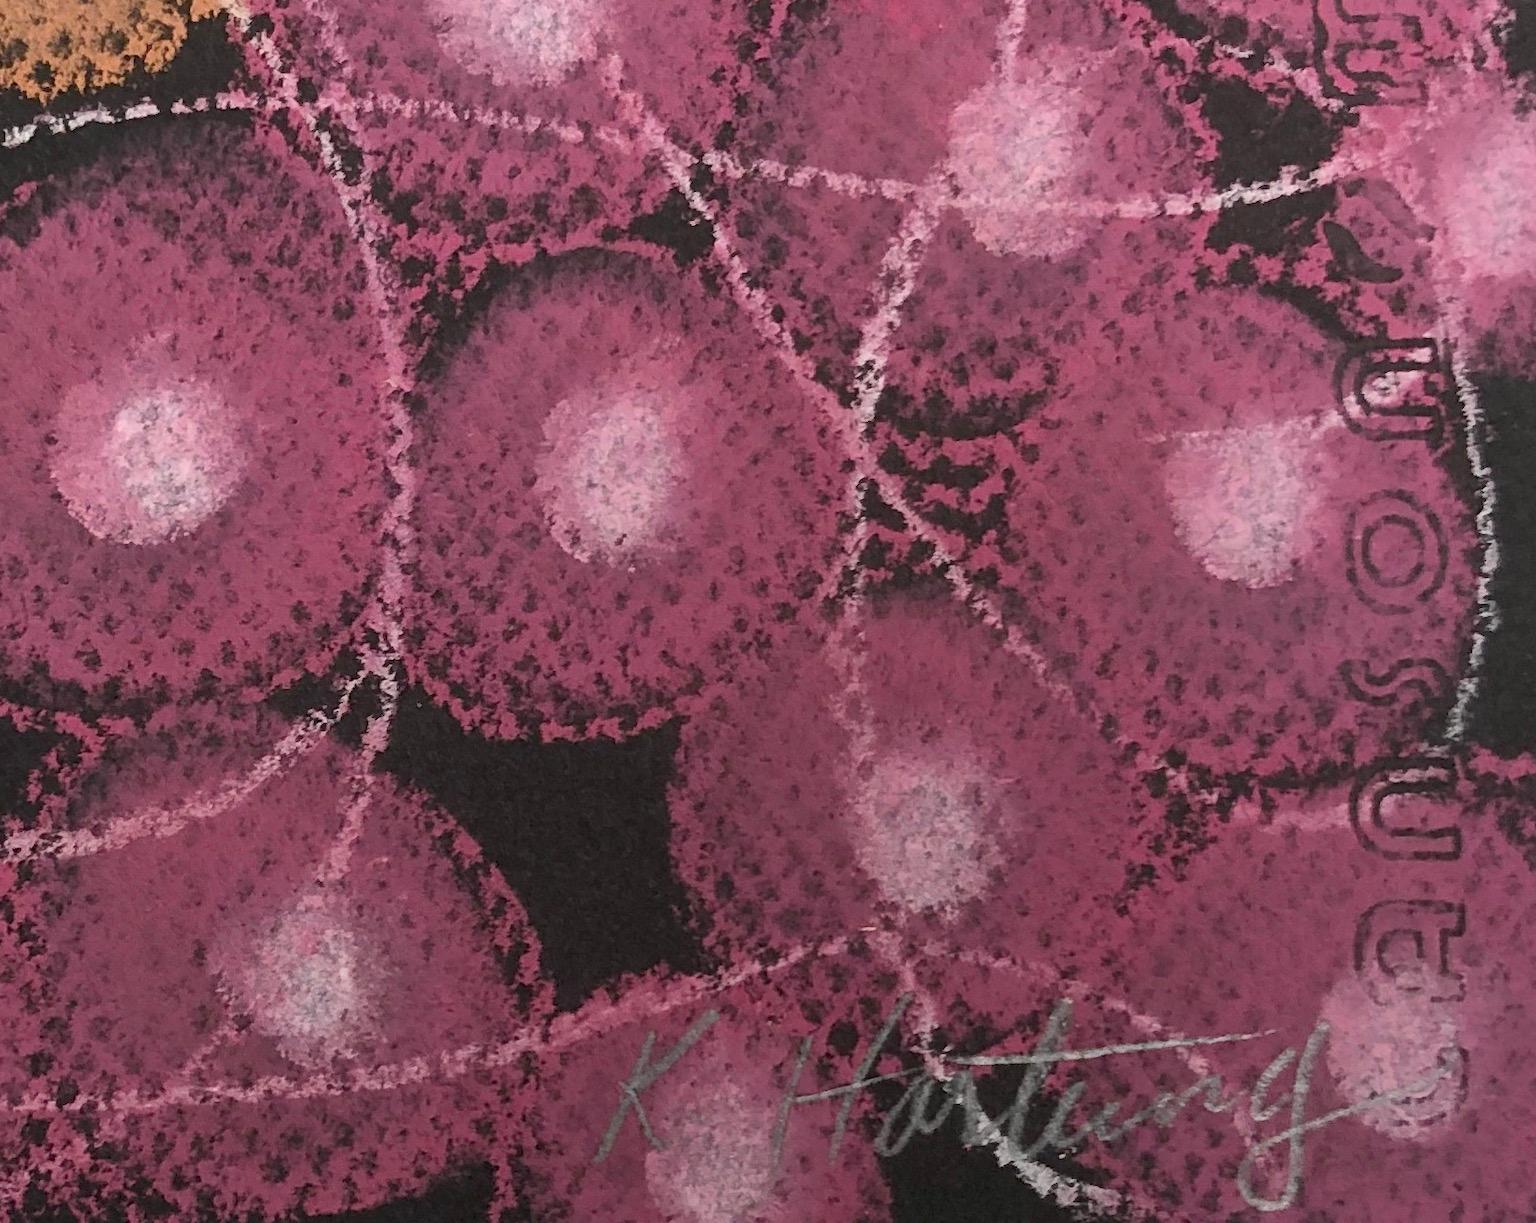 Kay Hartung’s “Microbial Gathering 1” is a 19.5 x 25 inch pastel drawing done on black Canson Mi Teintes paper. In colors of orange, pink, purple and white, the drawing is richly detailed with broad areas of color as well as fine lines. The use of